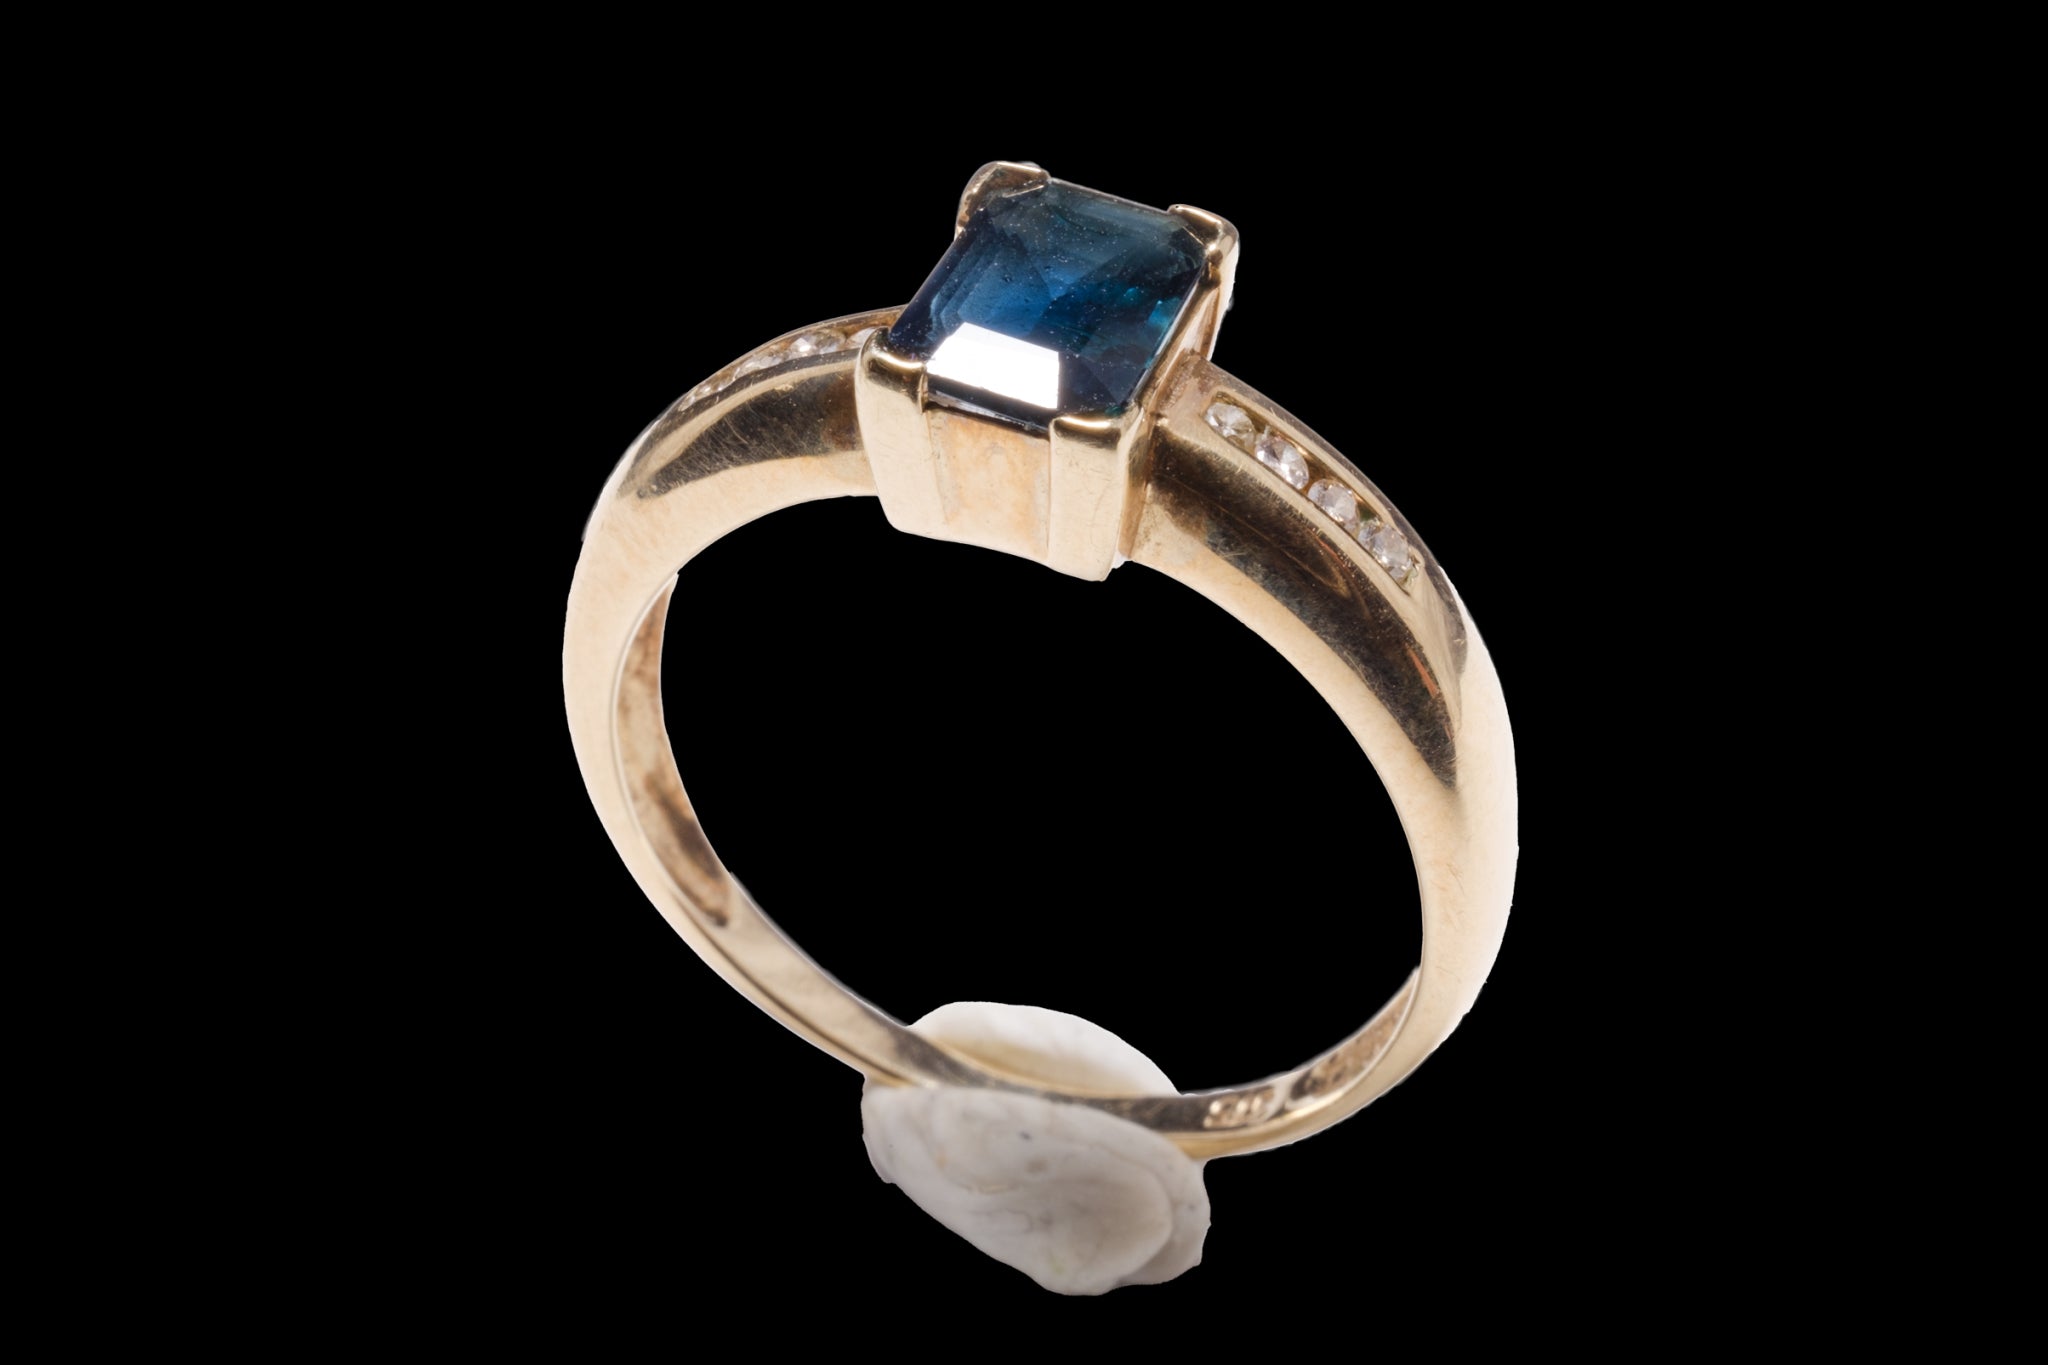 Vintage 9ct Gold and Sapphire Ring.